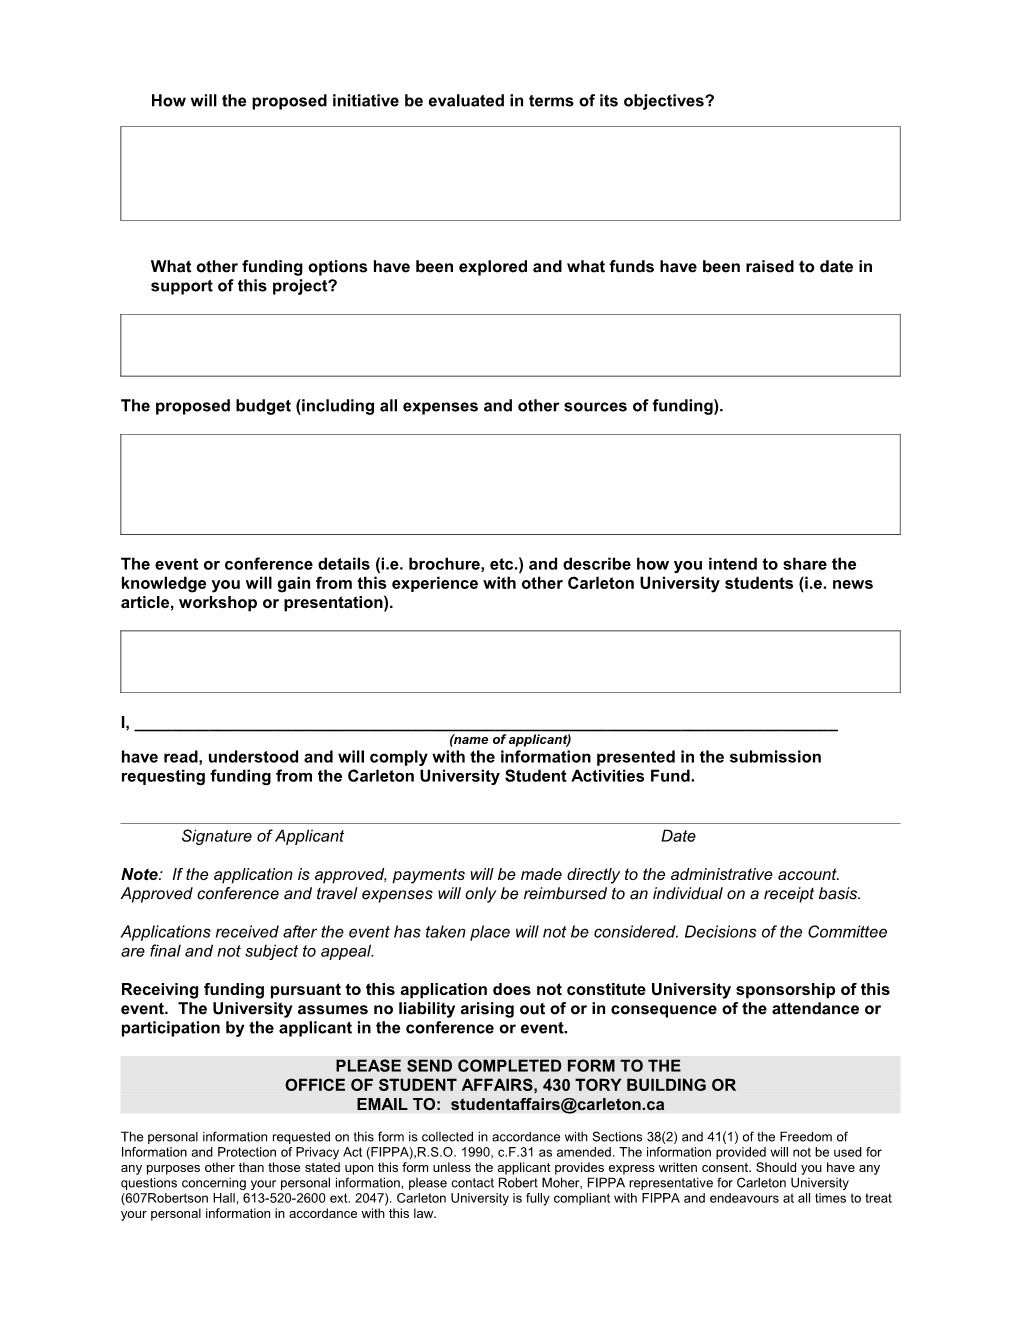 Student Activities Fund INDIVIDUAL APPLICATION FORM